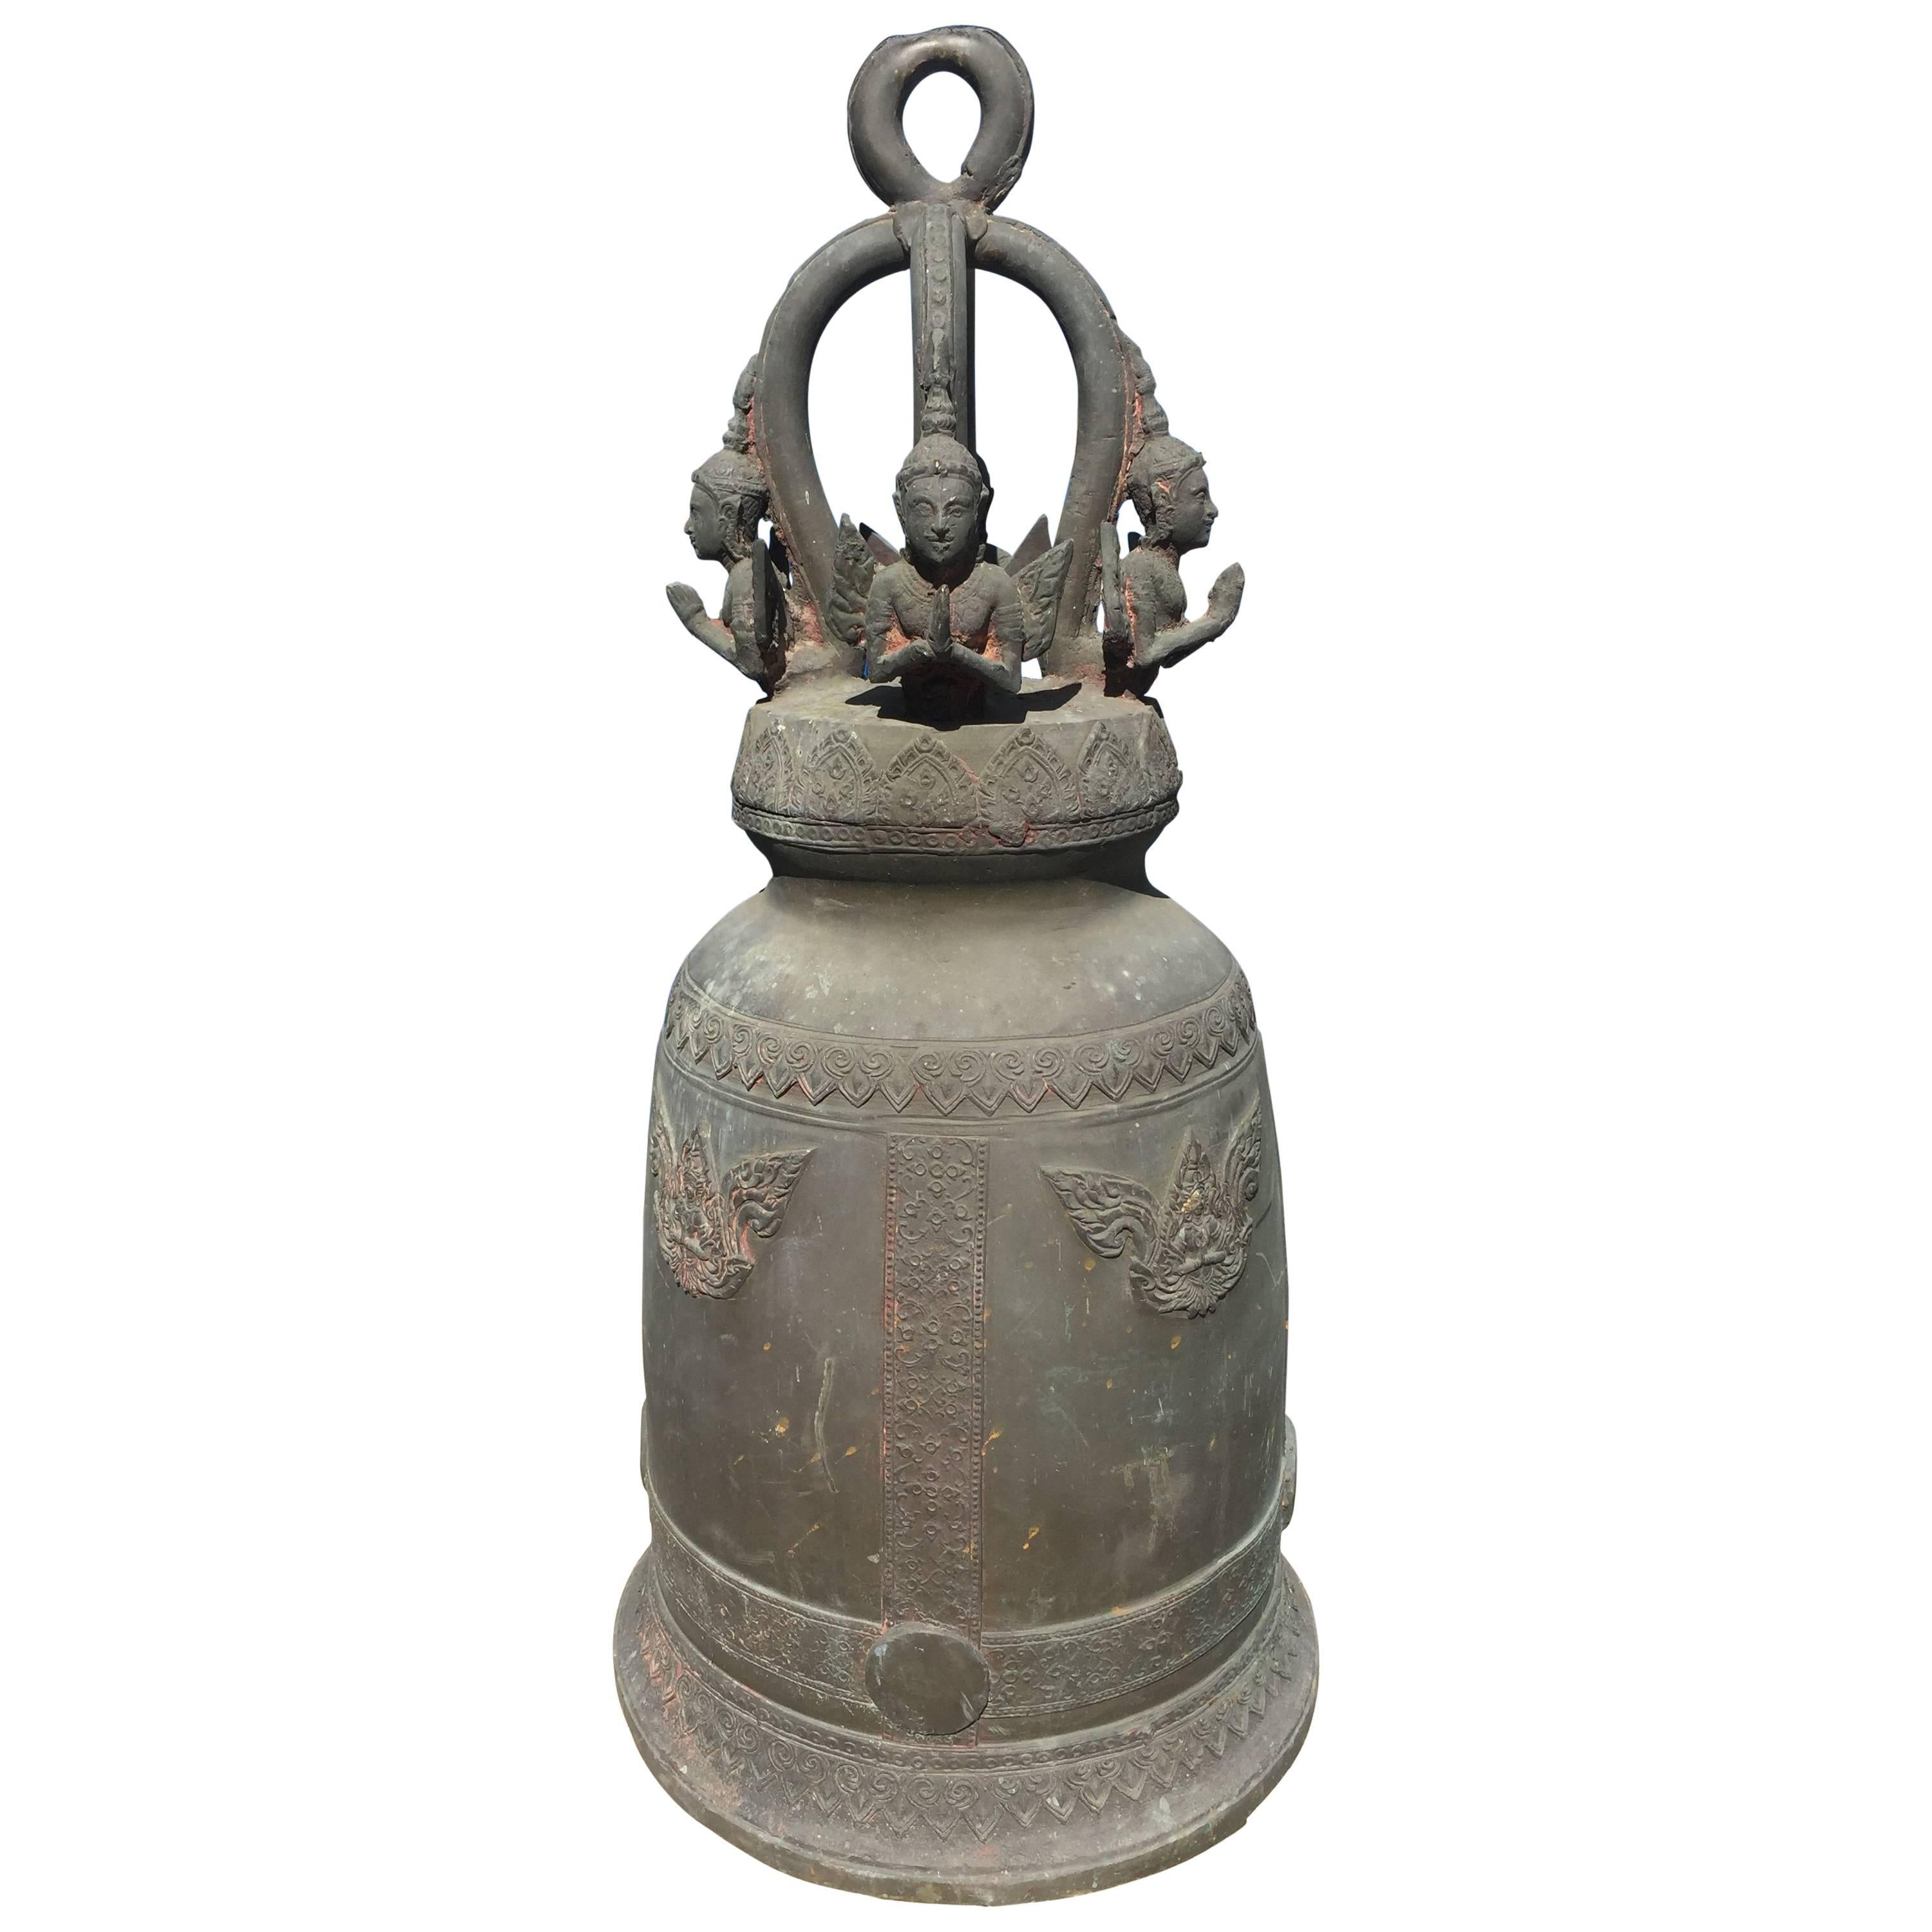 Beautiful deep resonating ring tones await the new owner of this one-of-a-kind master work!

From Indonesia, comes this superb antique hand cast bronze temple bell dating to the early 20th century and mounted in a Japanese master craftsmen custom